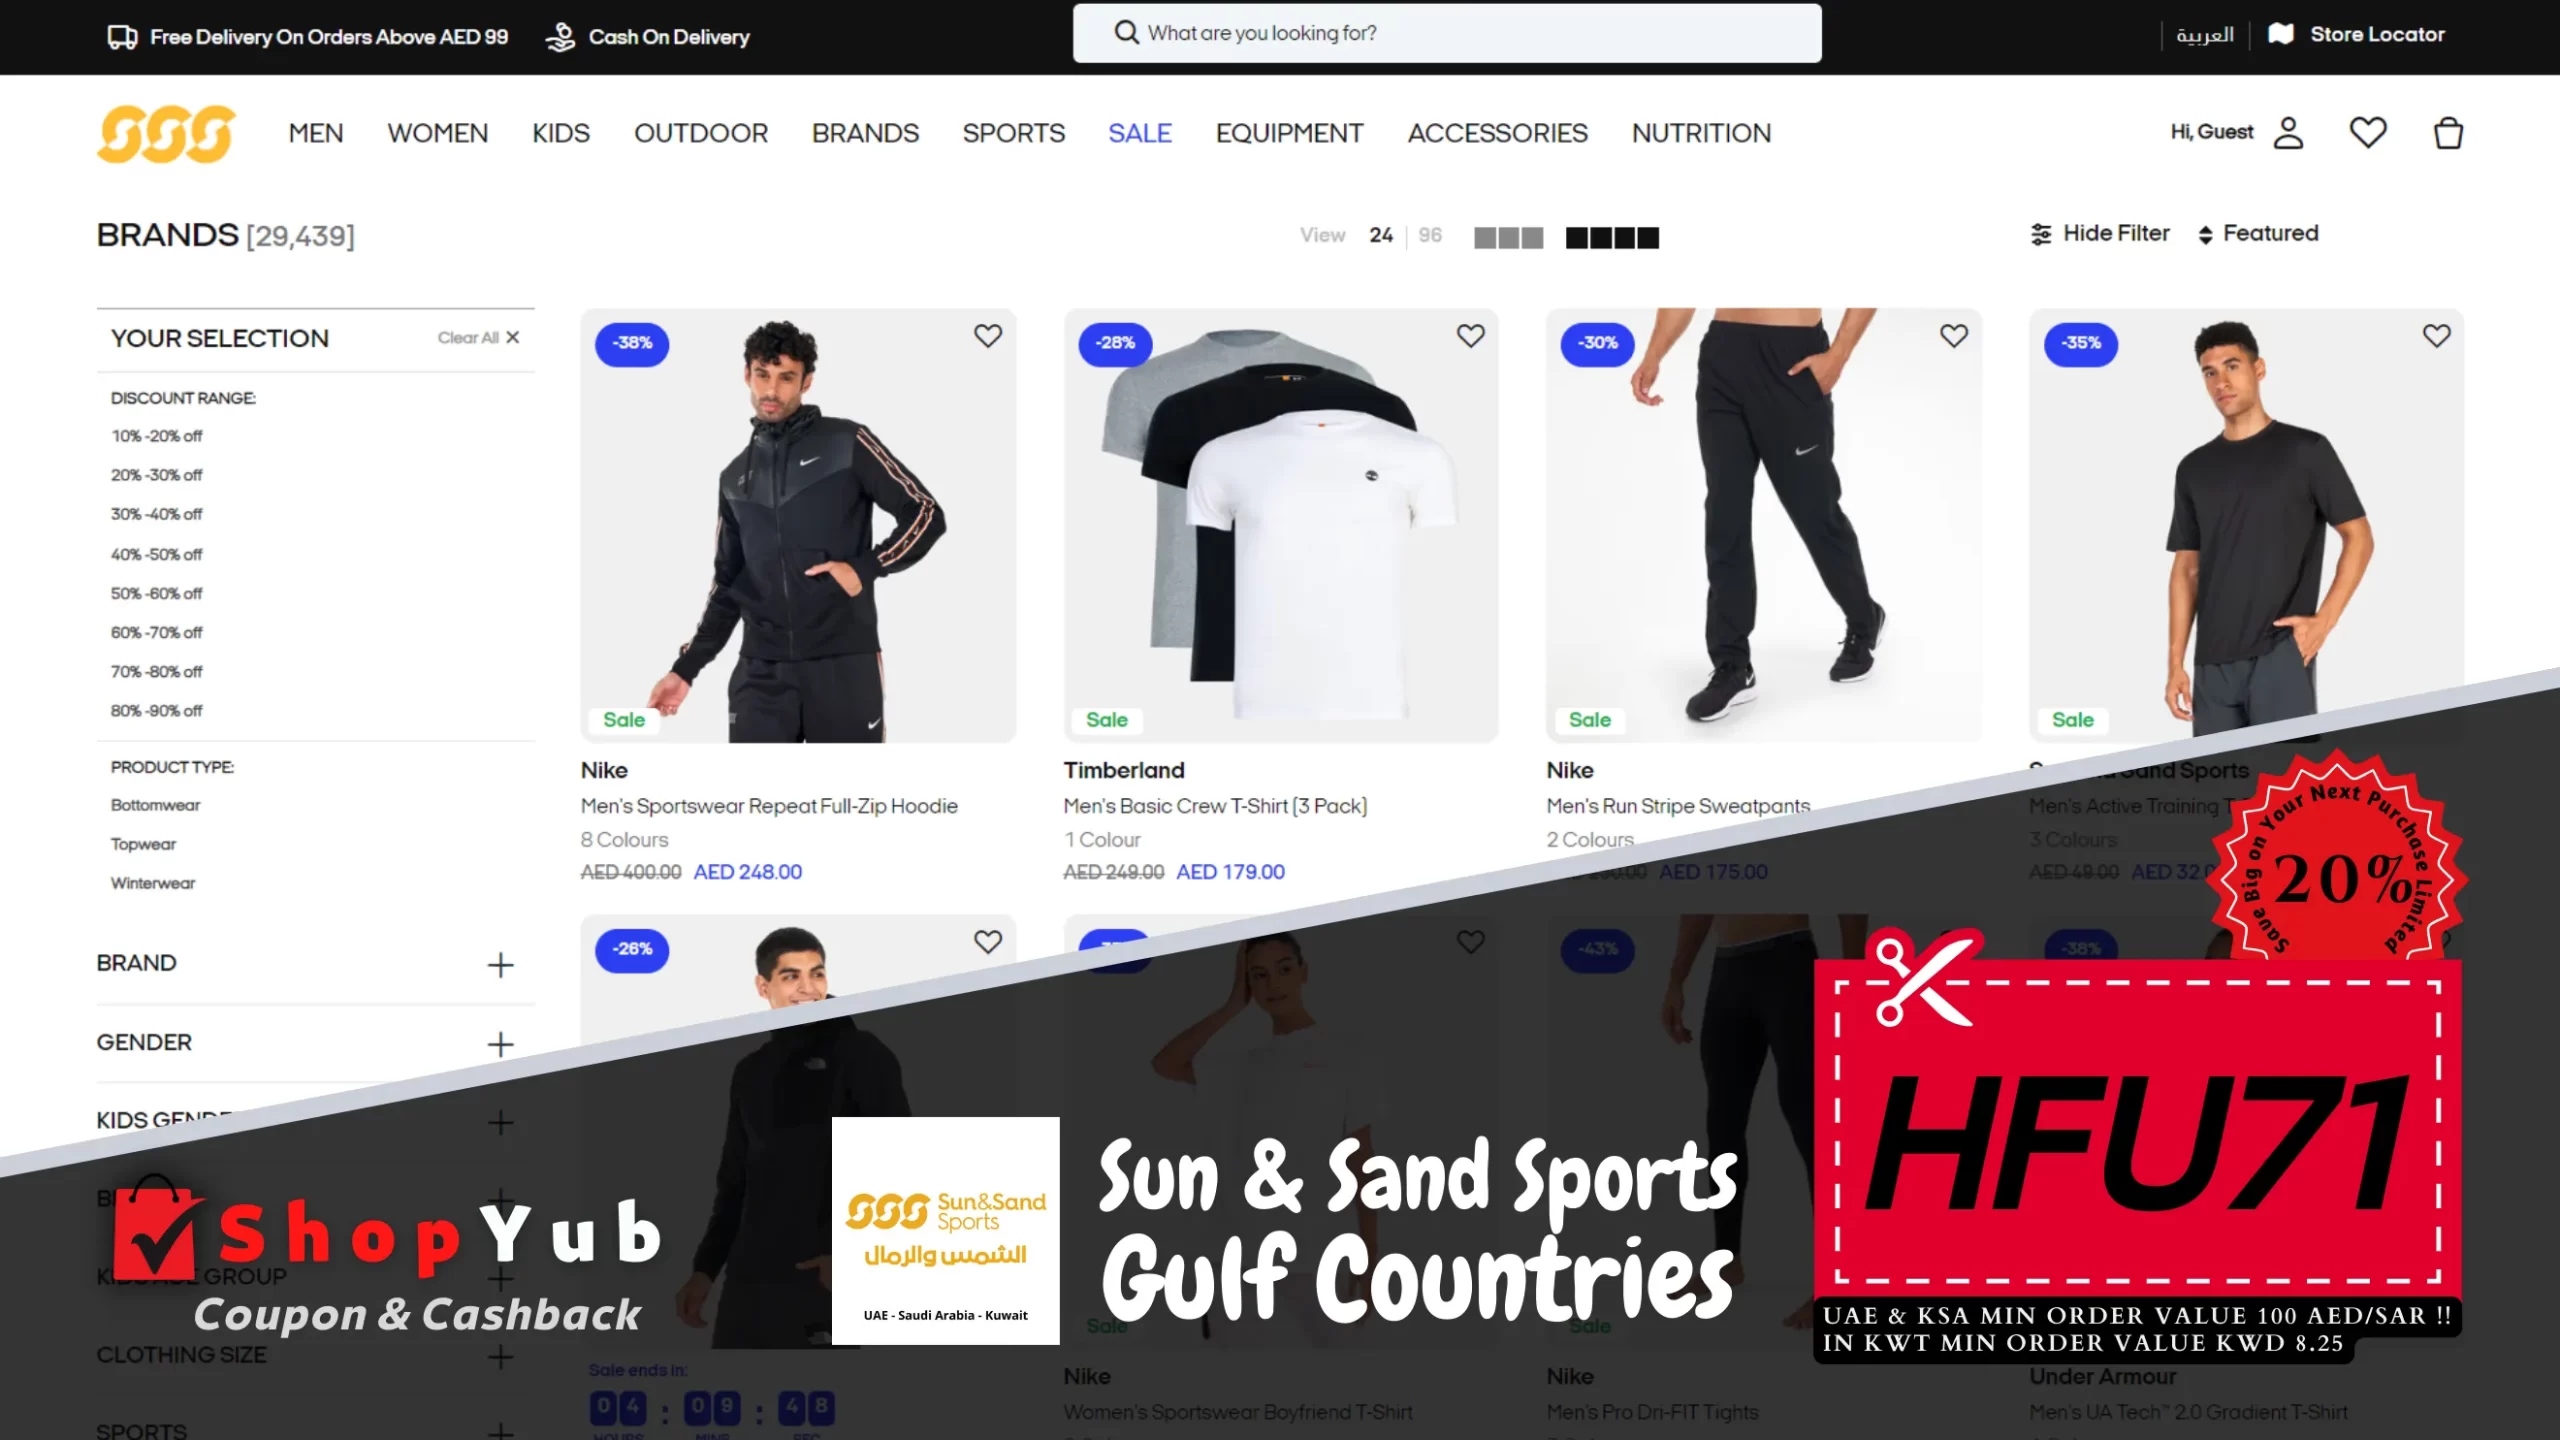 Use Sun & Sand Sports Coupon Code: HFU71 | Verified Sun & Sand Sports Coupons for KSA | 15% Off Sun & Sand Sports Discount Codes Fashion online | March 2024.